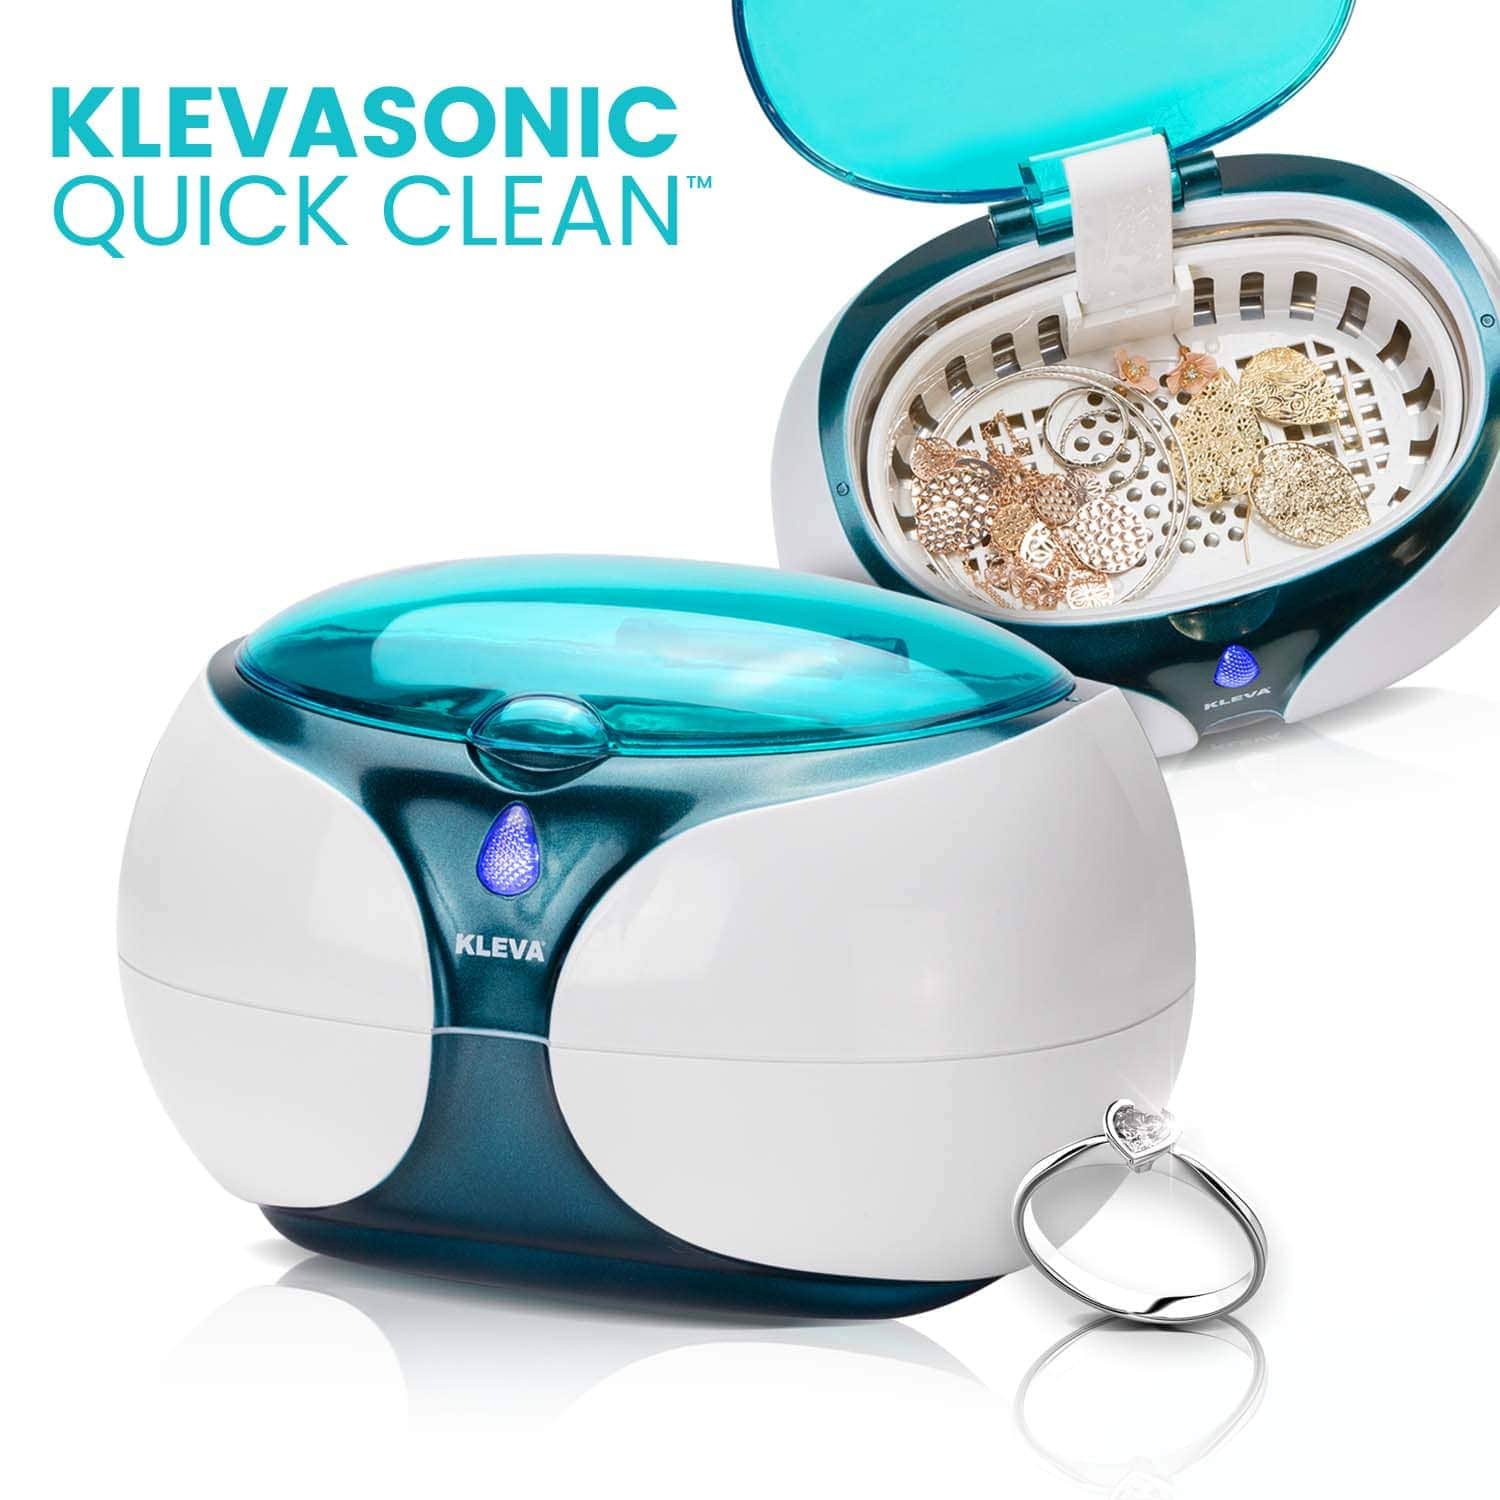 Second Sonic Quick Clean - Ultra Sonic Jewellery Cleaner UPSELL Kleva Range - Everyday Innovations   